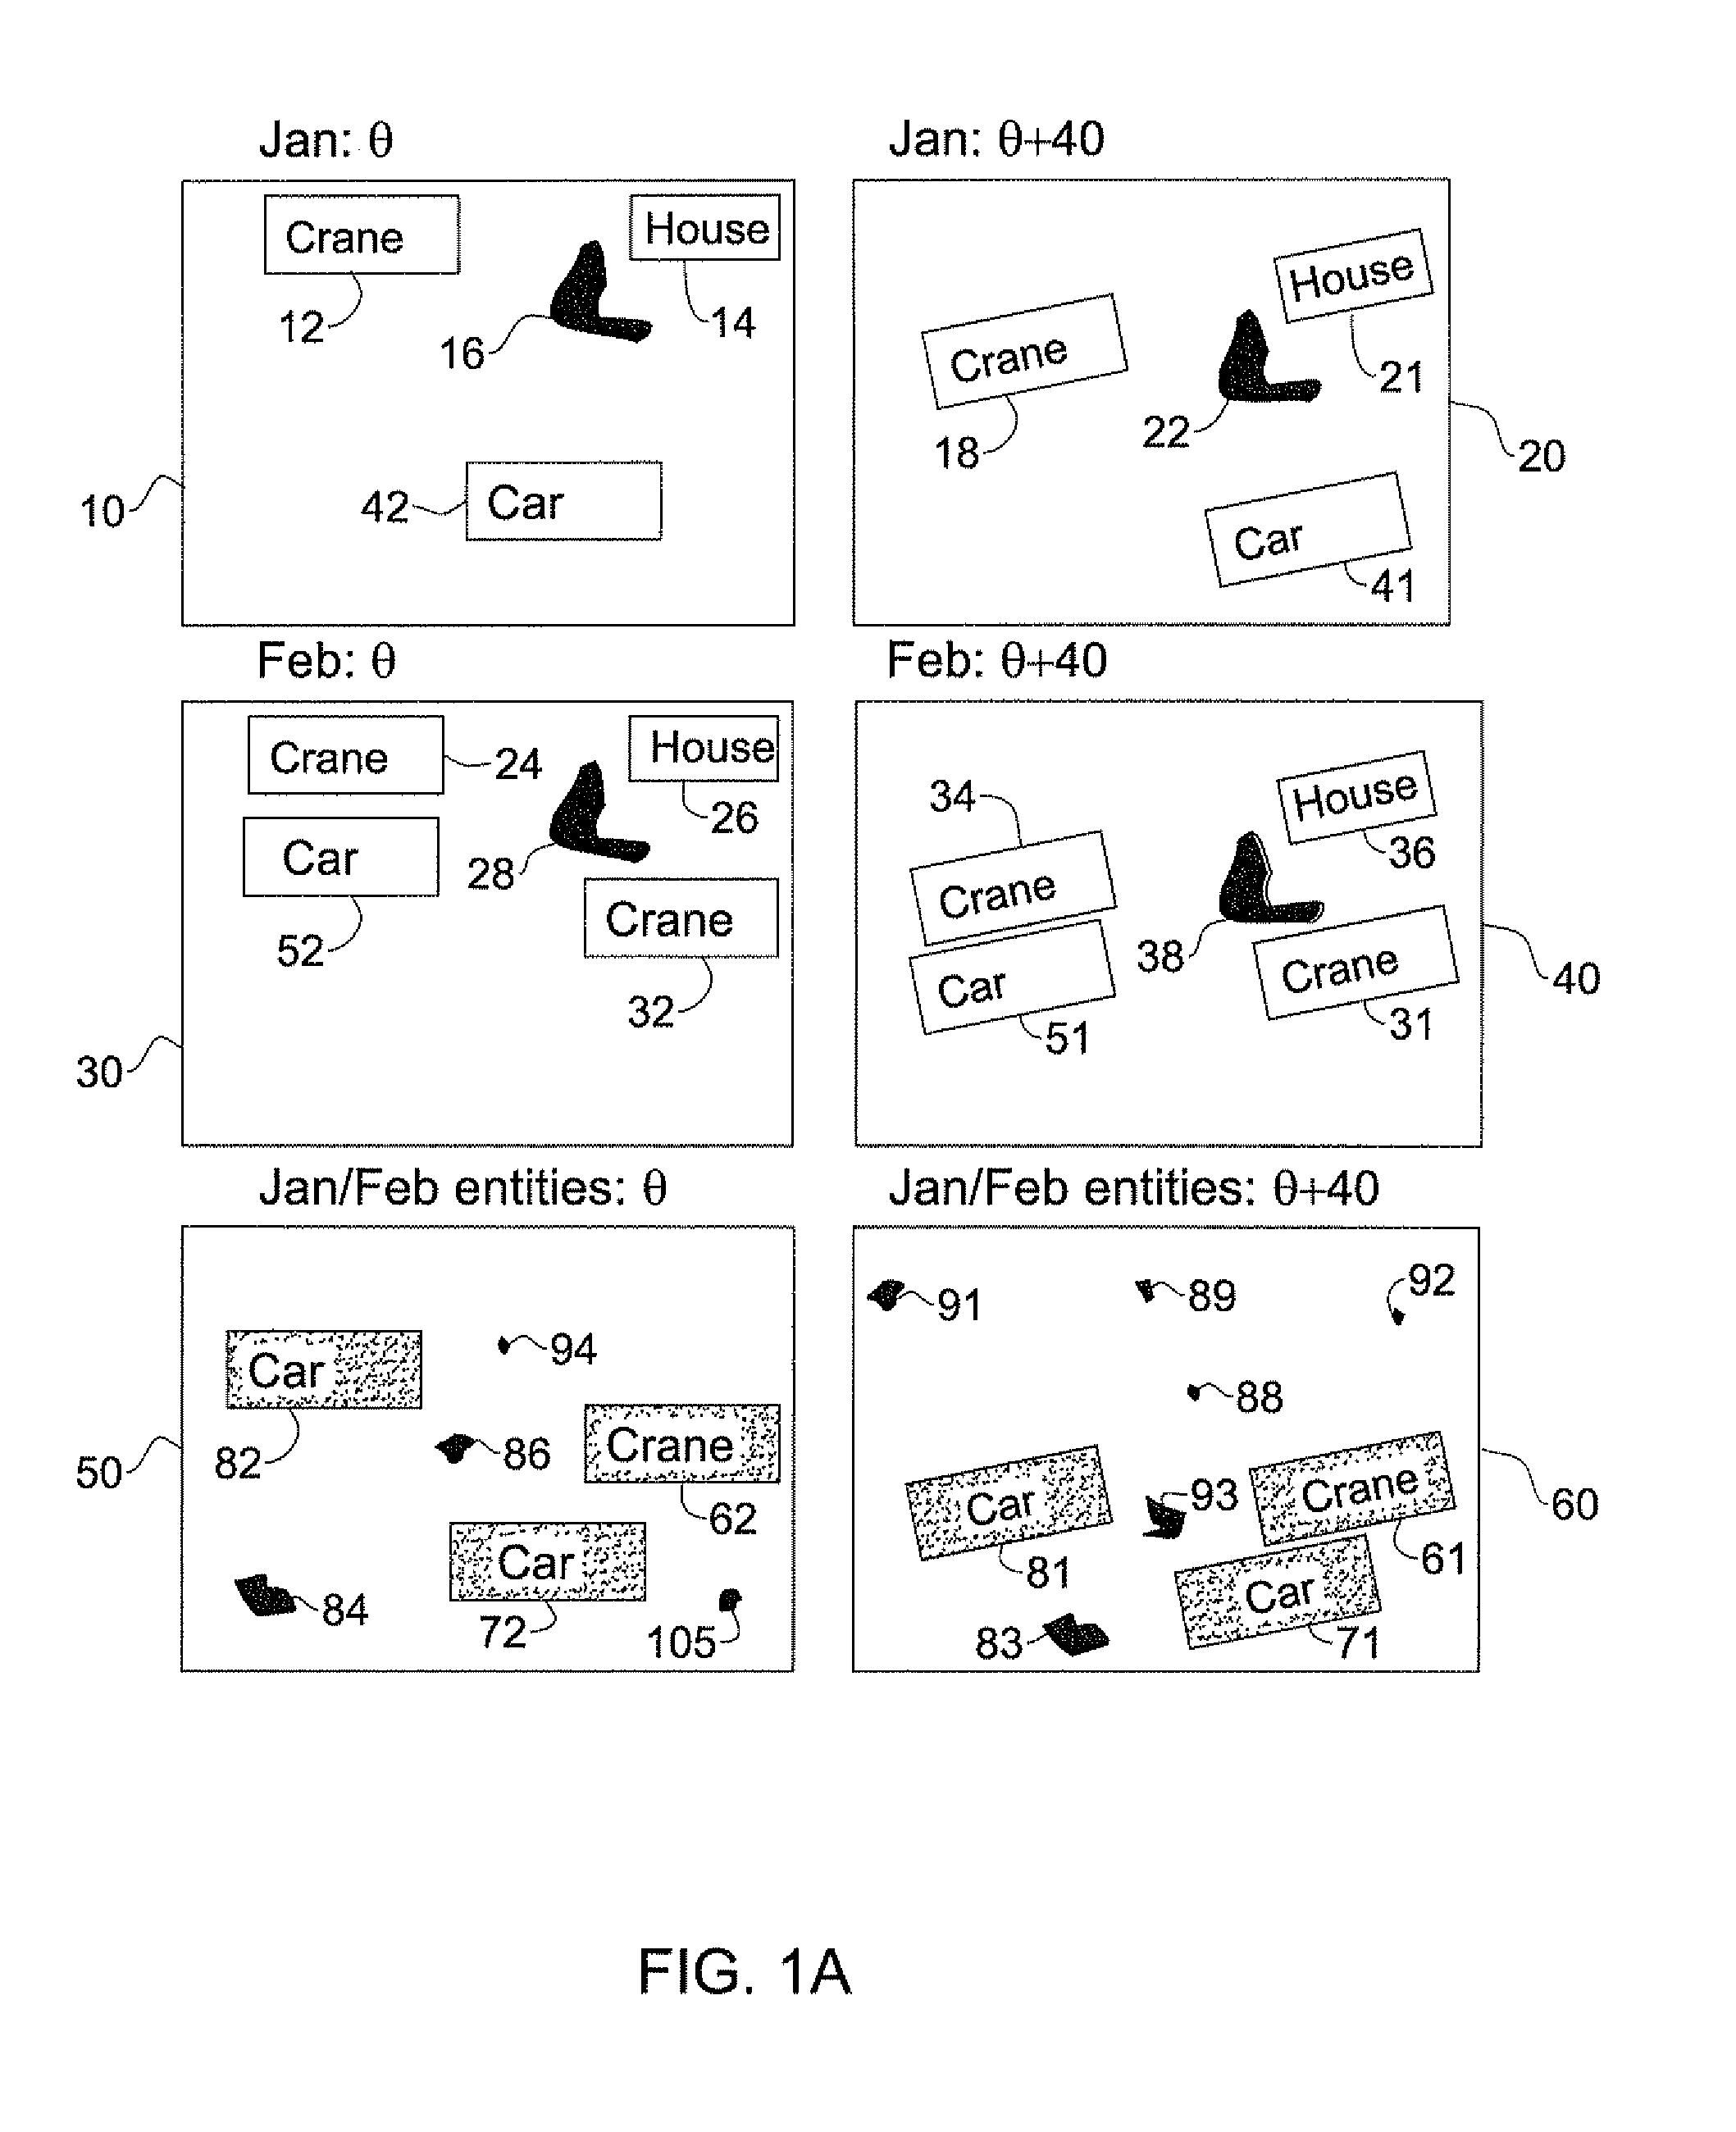 Stereo-image registration and change detection system and method